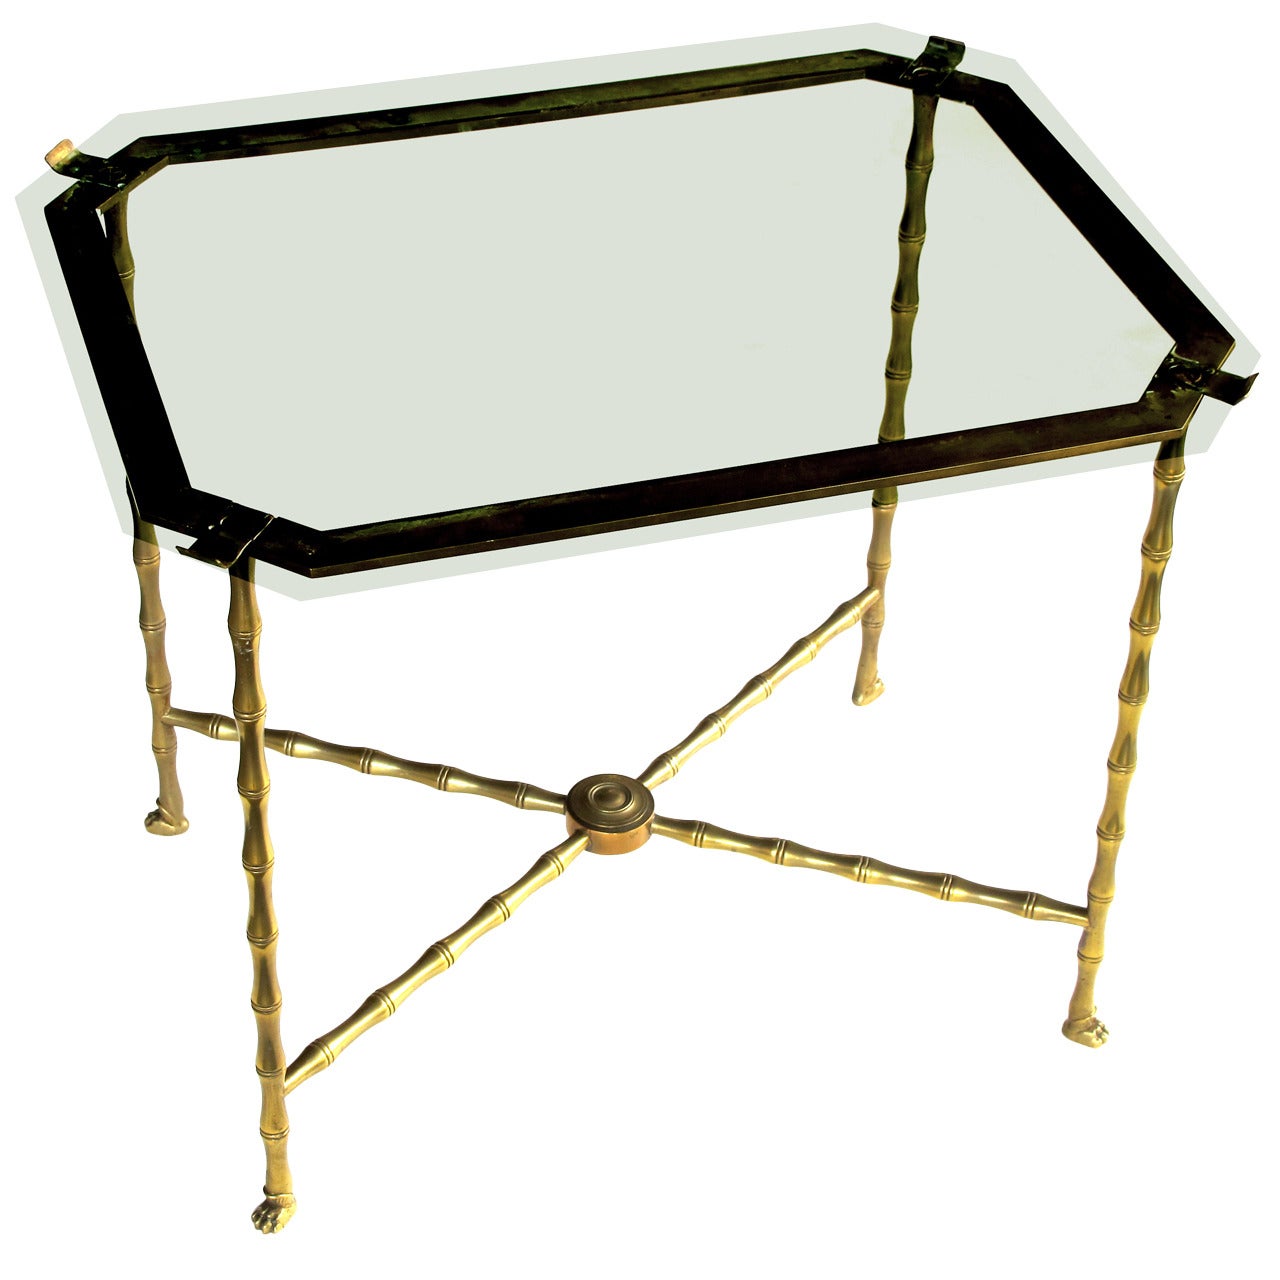 Stylish French 1940s Faux Bamboo Brass Side Table by Maison Bagues, Paris